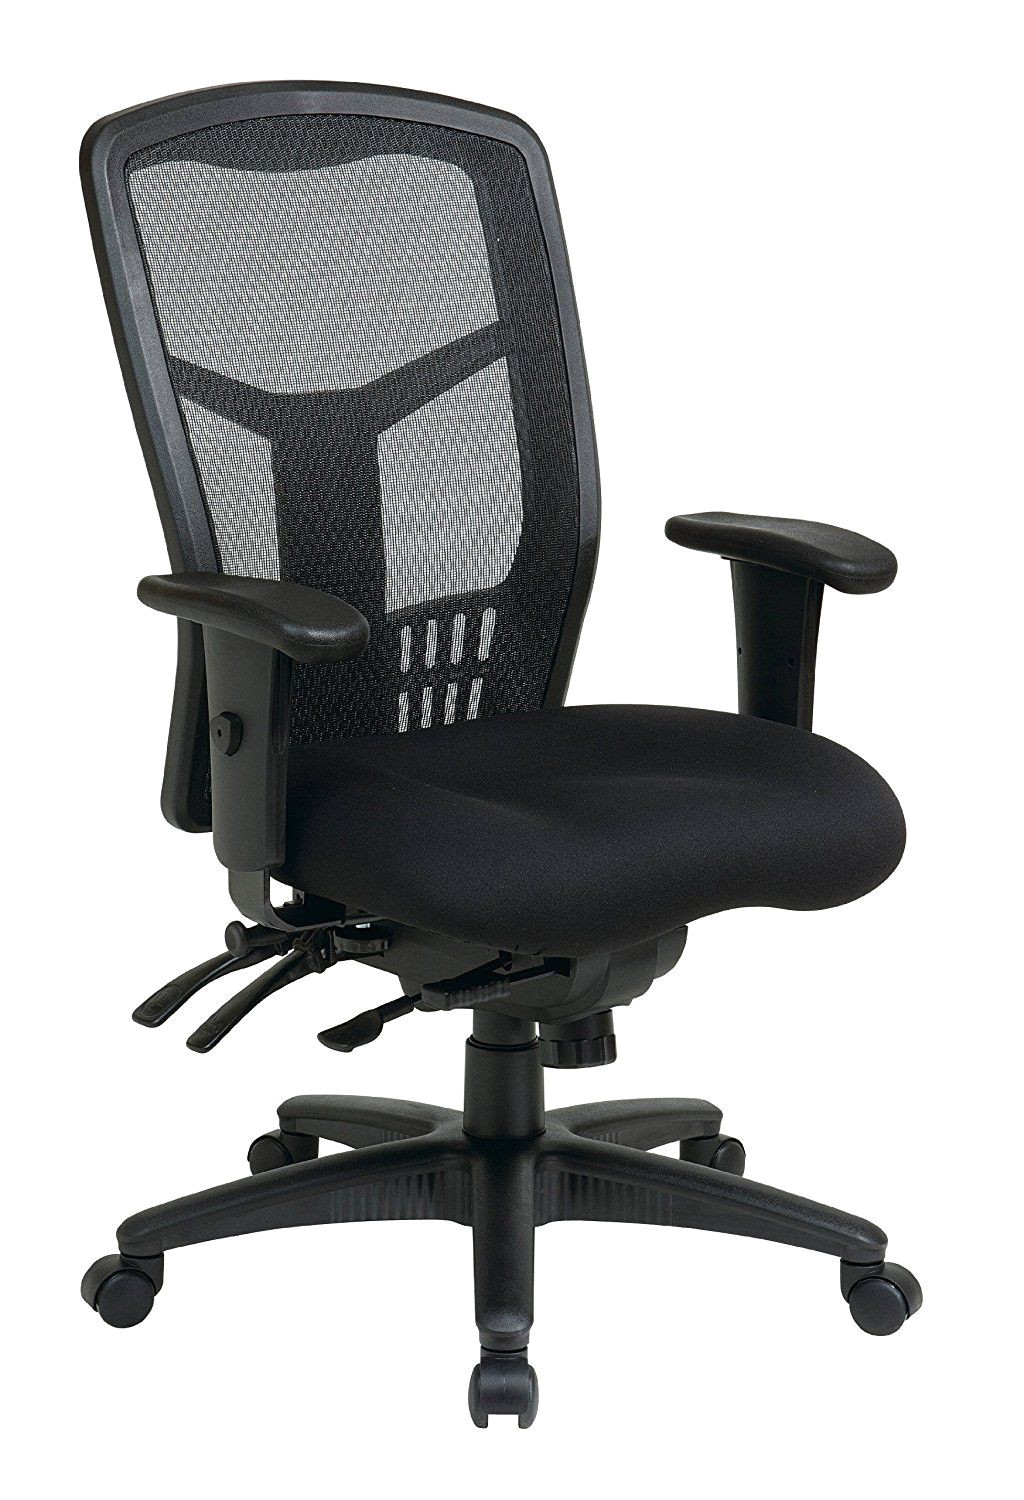 Best Office Chair with Leg Rest the 7 Best Ergonomic Office Chairs to Buy In 2019